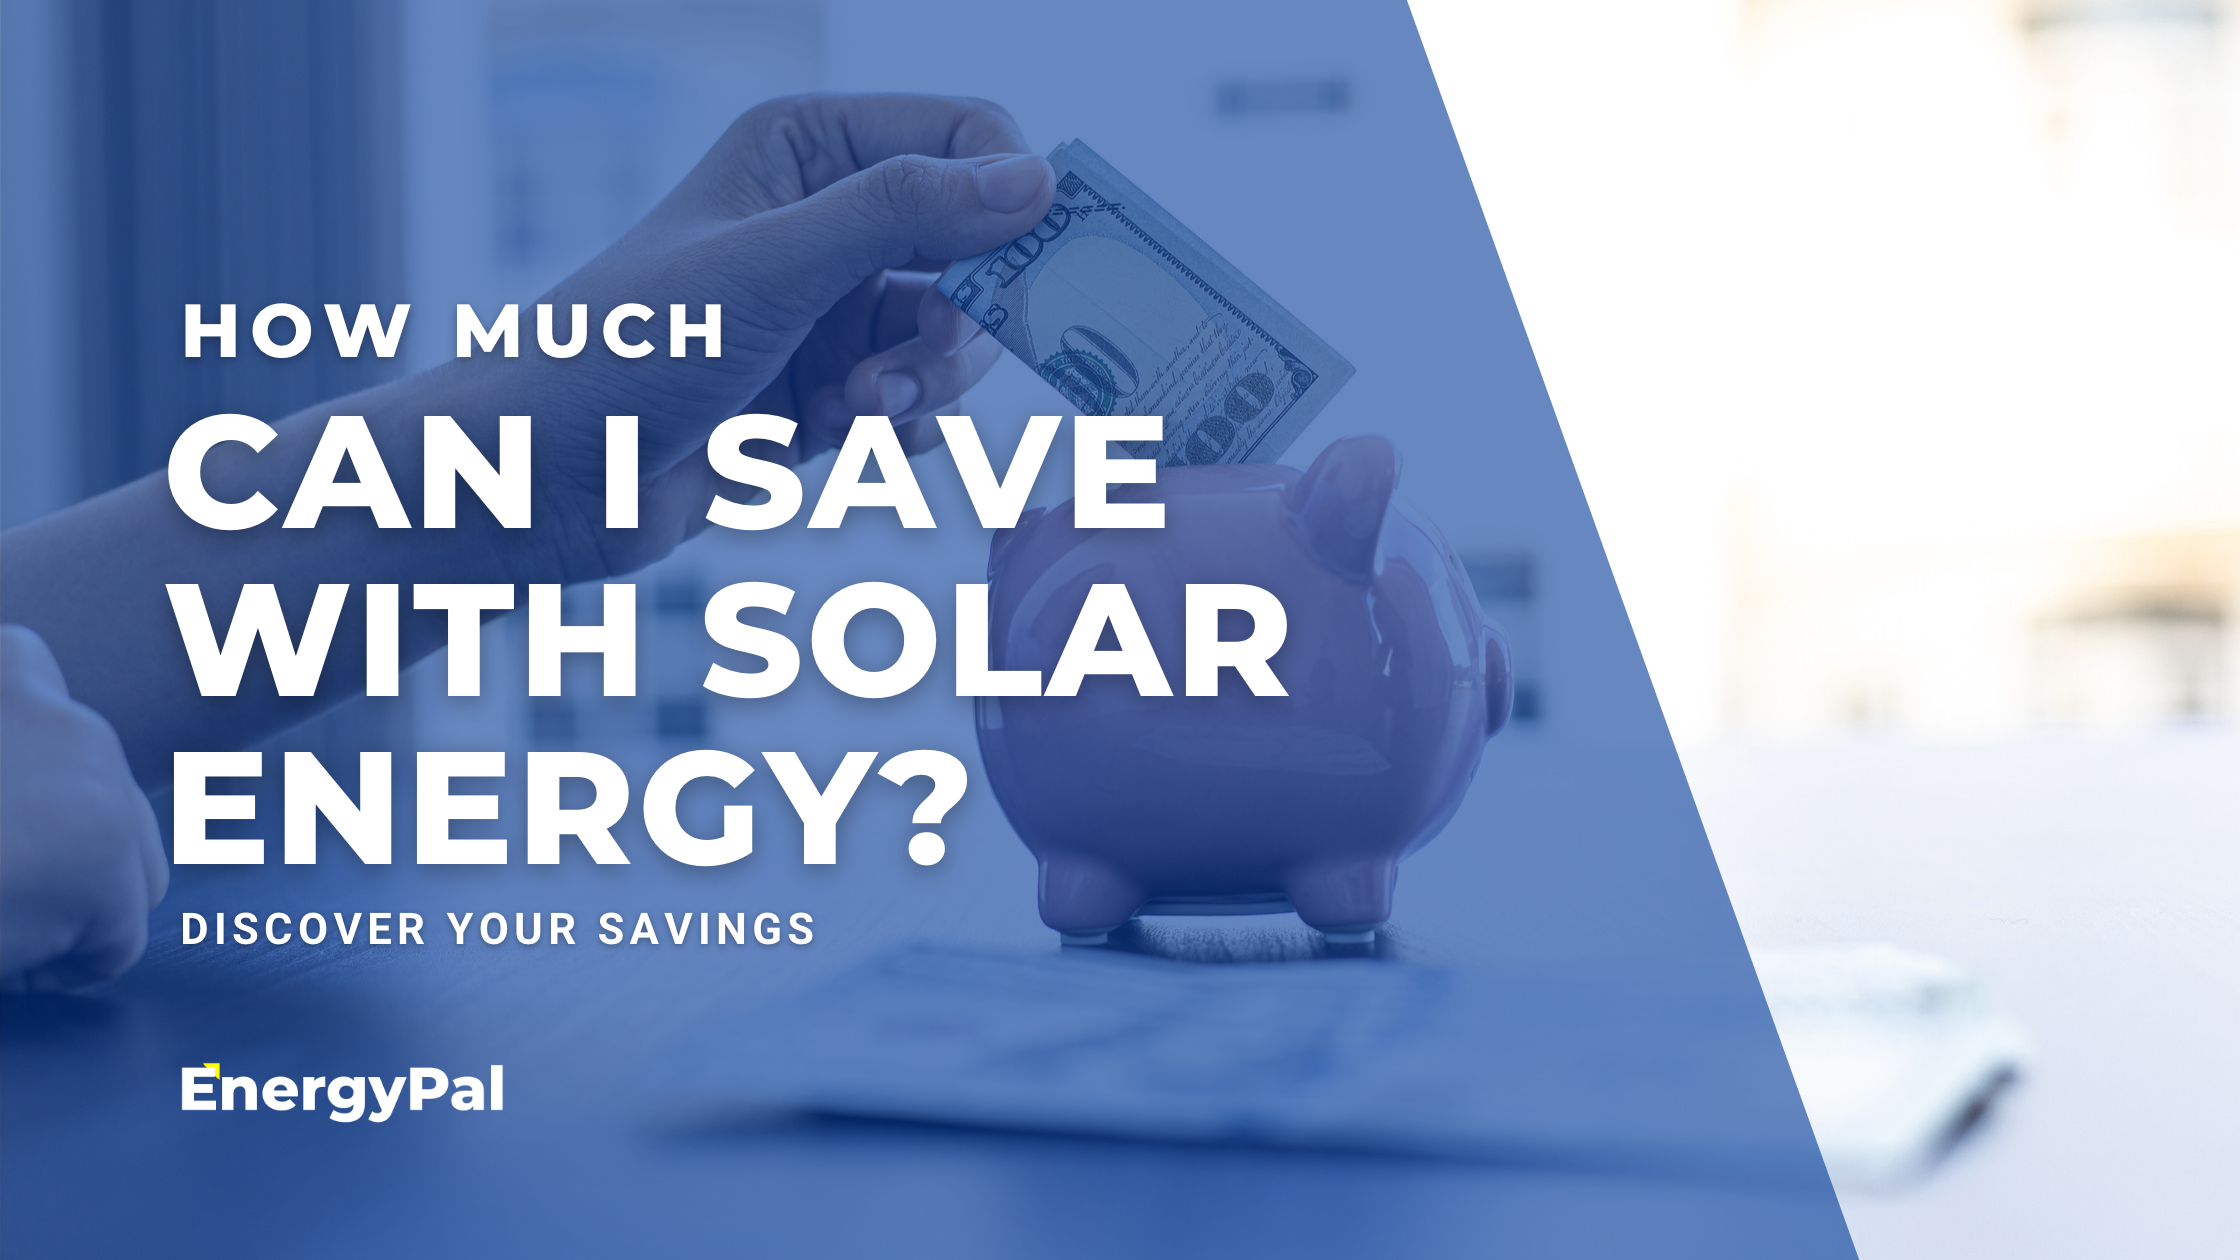 How Much Can I Save With Solar Energy?